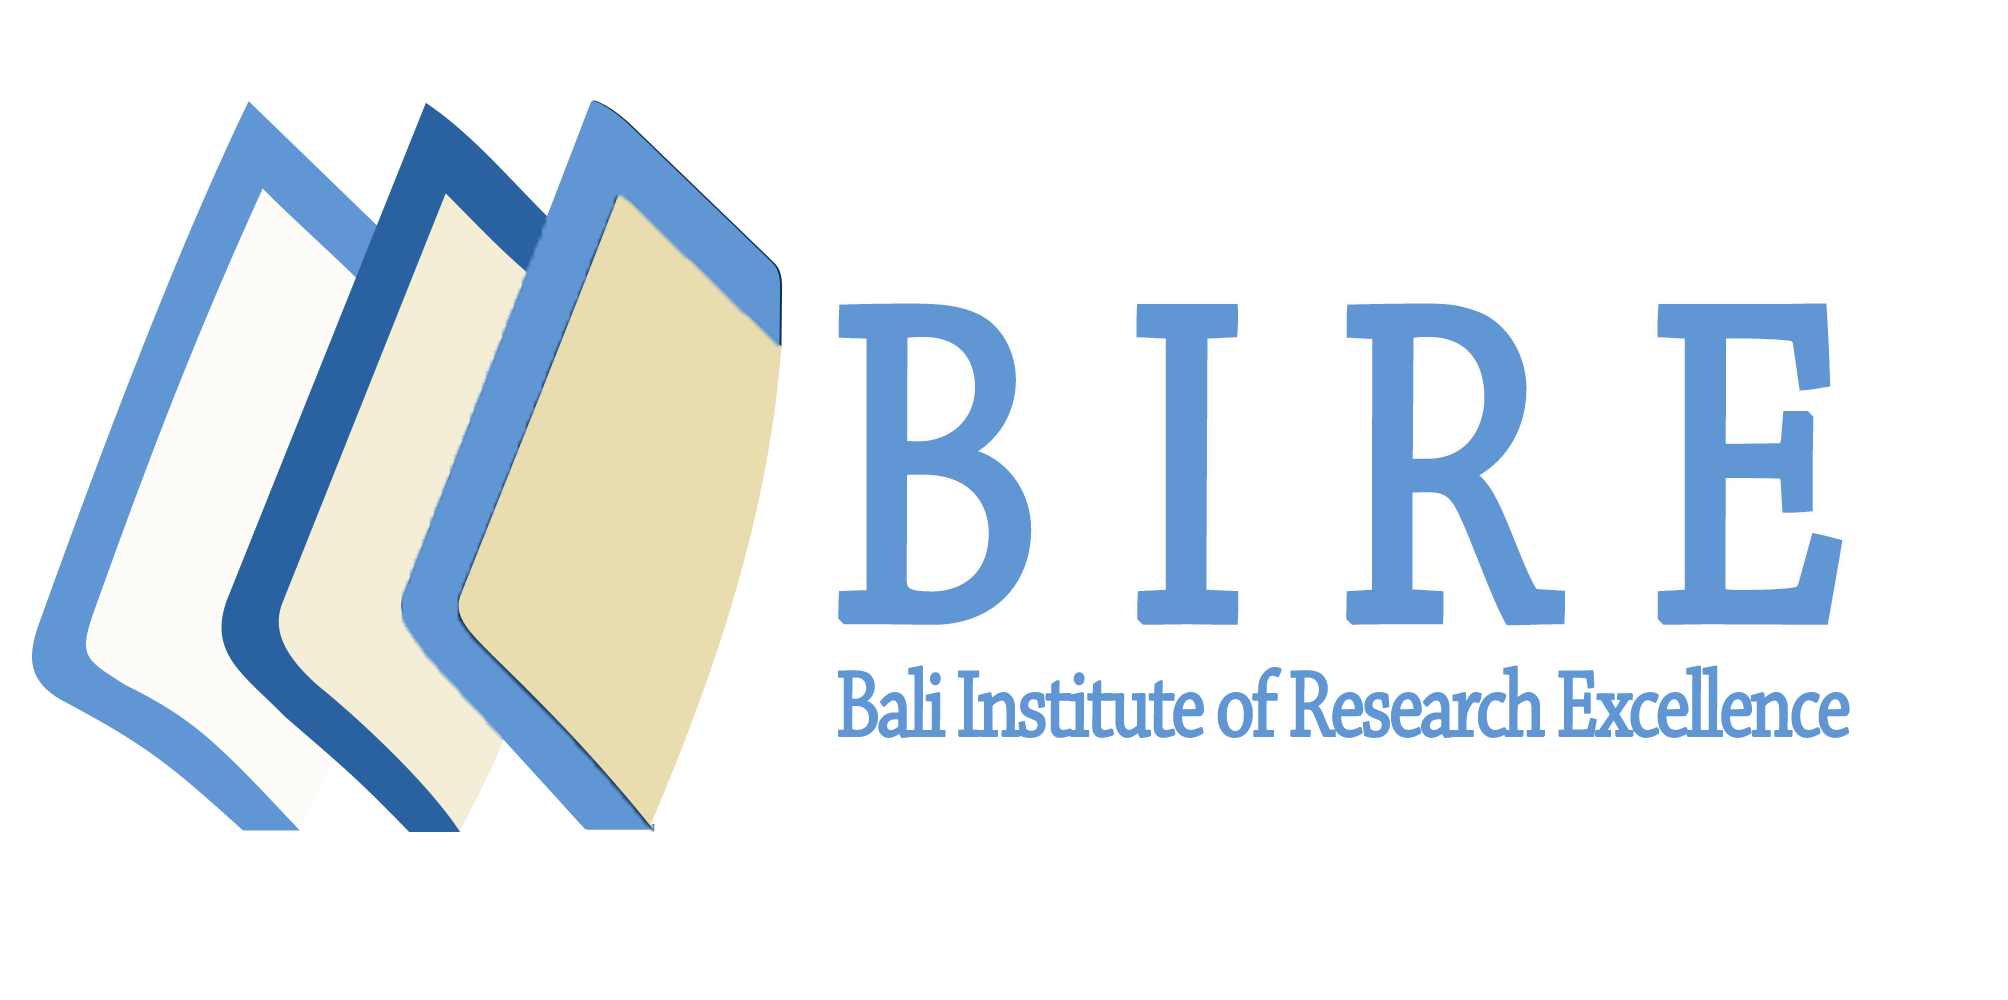 Bali Institute of Research Excellence is an effort of
academic scholars to provide a networking and collaboration platform to Bali
researchers specifically and Indonesian scholars in general. Through 